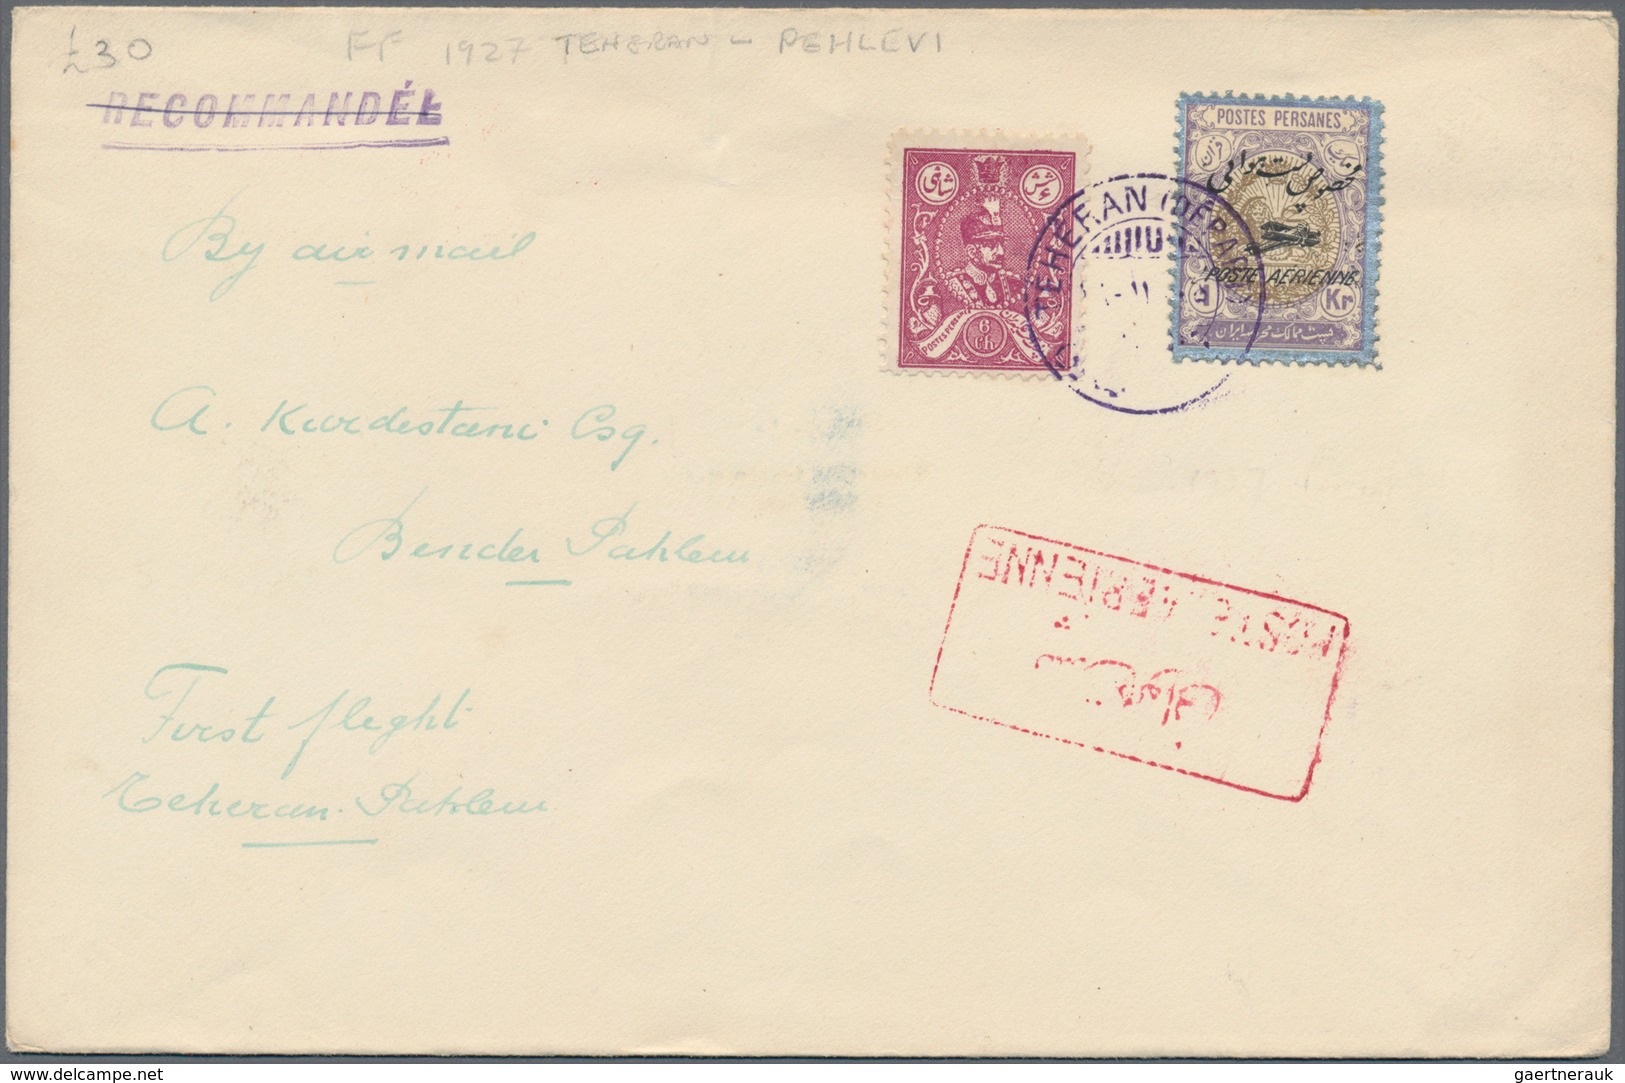 Asien: 1900/1970 (ca.), comprehensive holding of covers/cards, comprising Cambodia, Laos, Iran, Leba